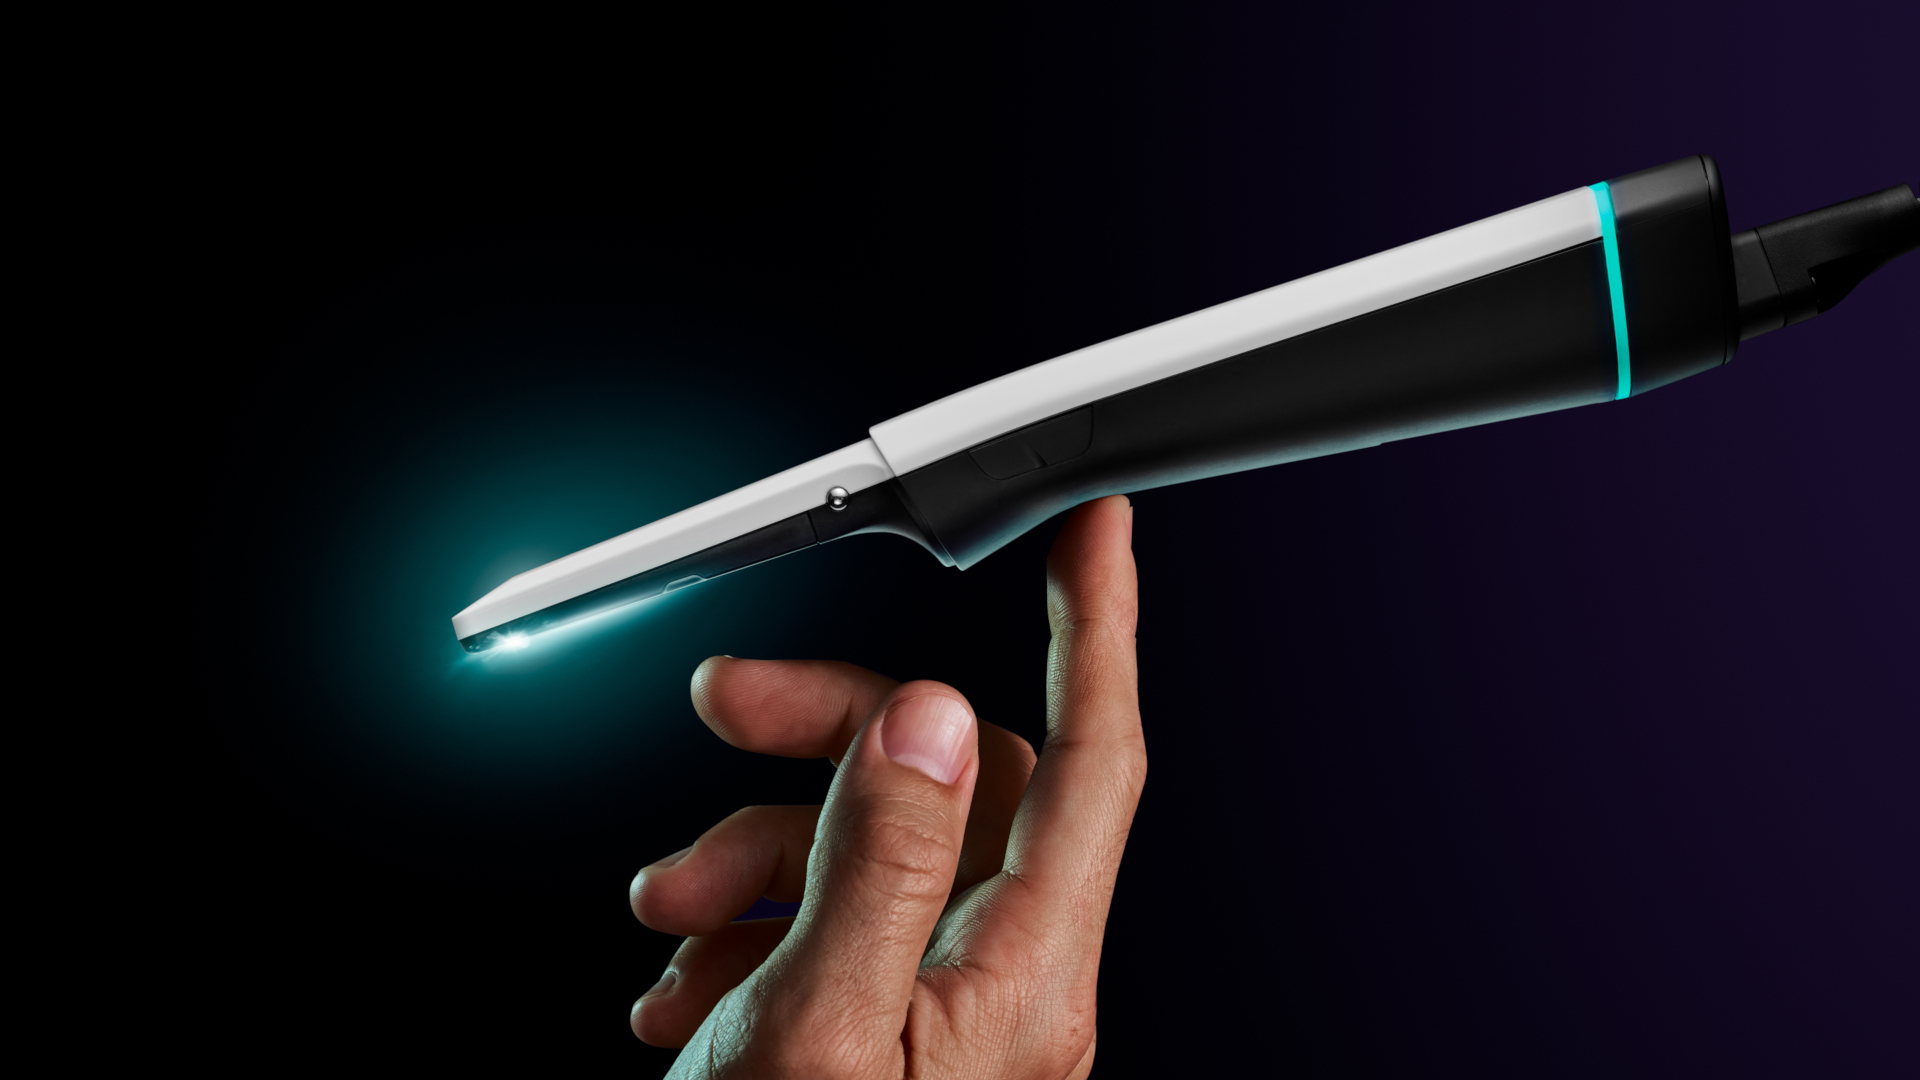 Align Technology announces new iTero Lumina intra-oral scanner